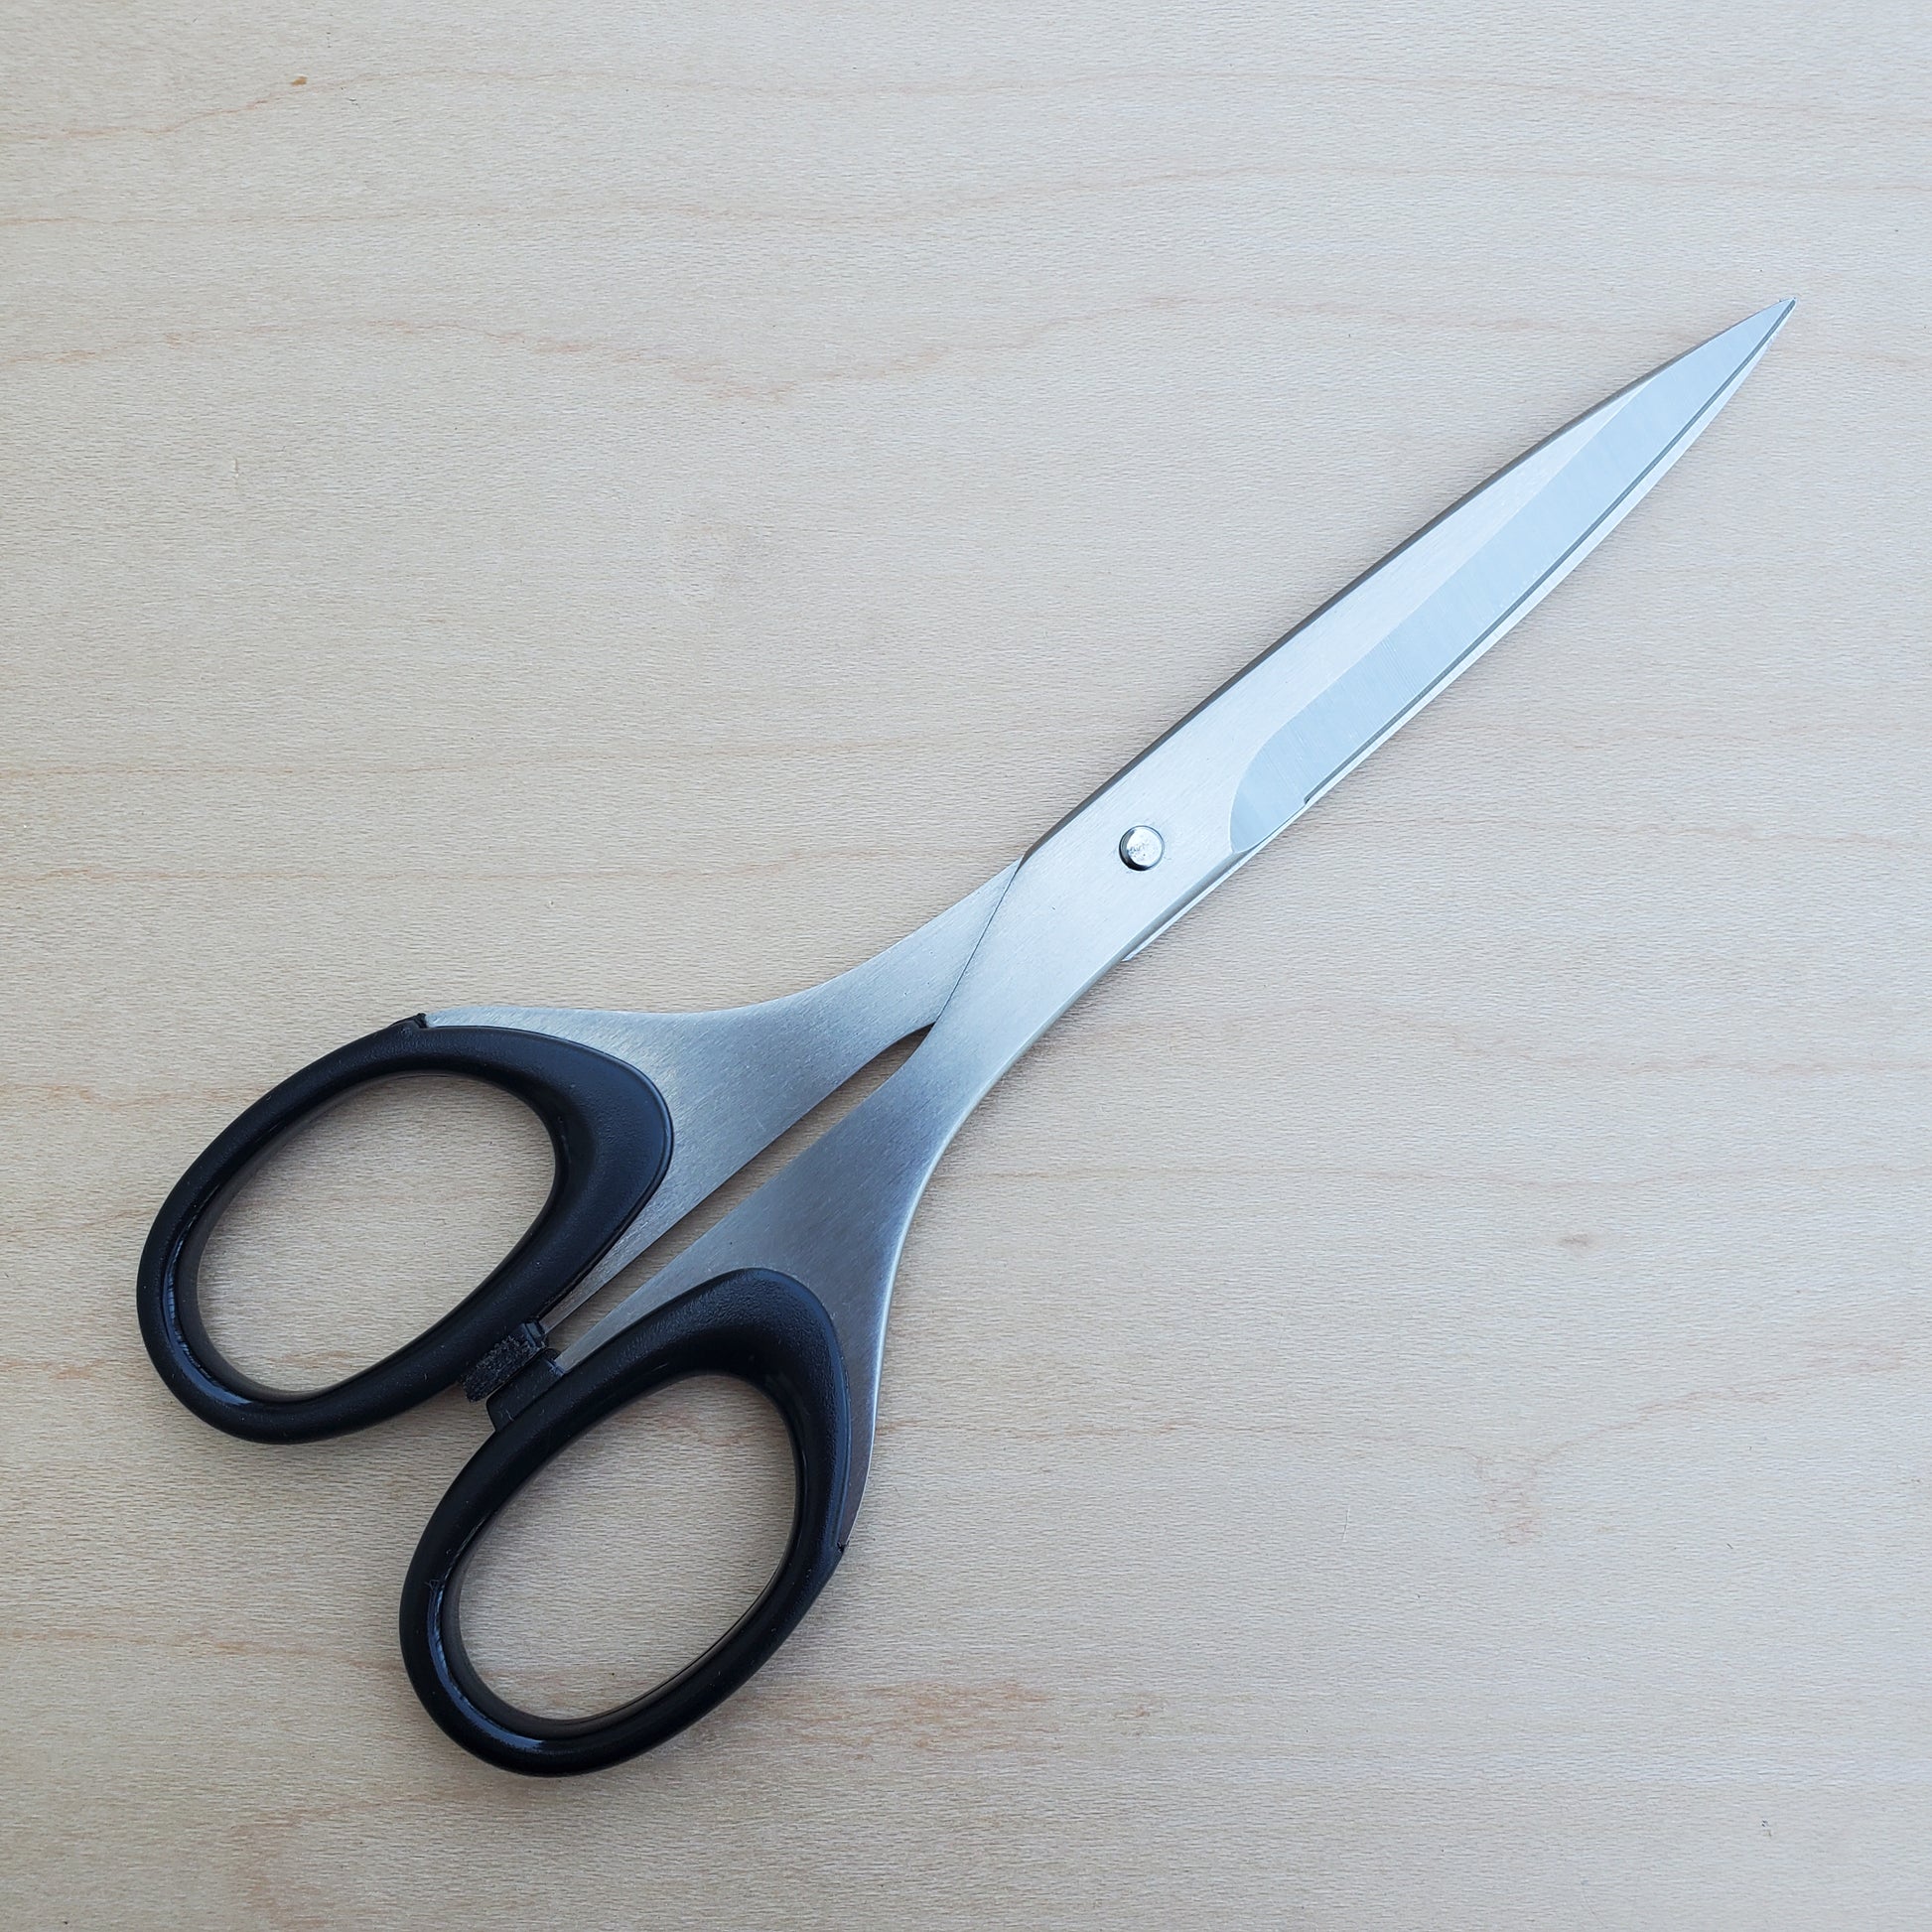 Silky Stainless Steel Office Scissors 6.7 inch NBS-170